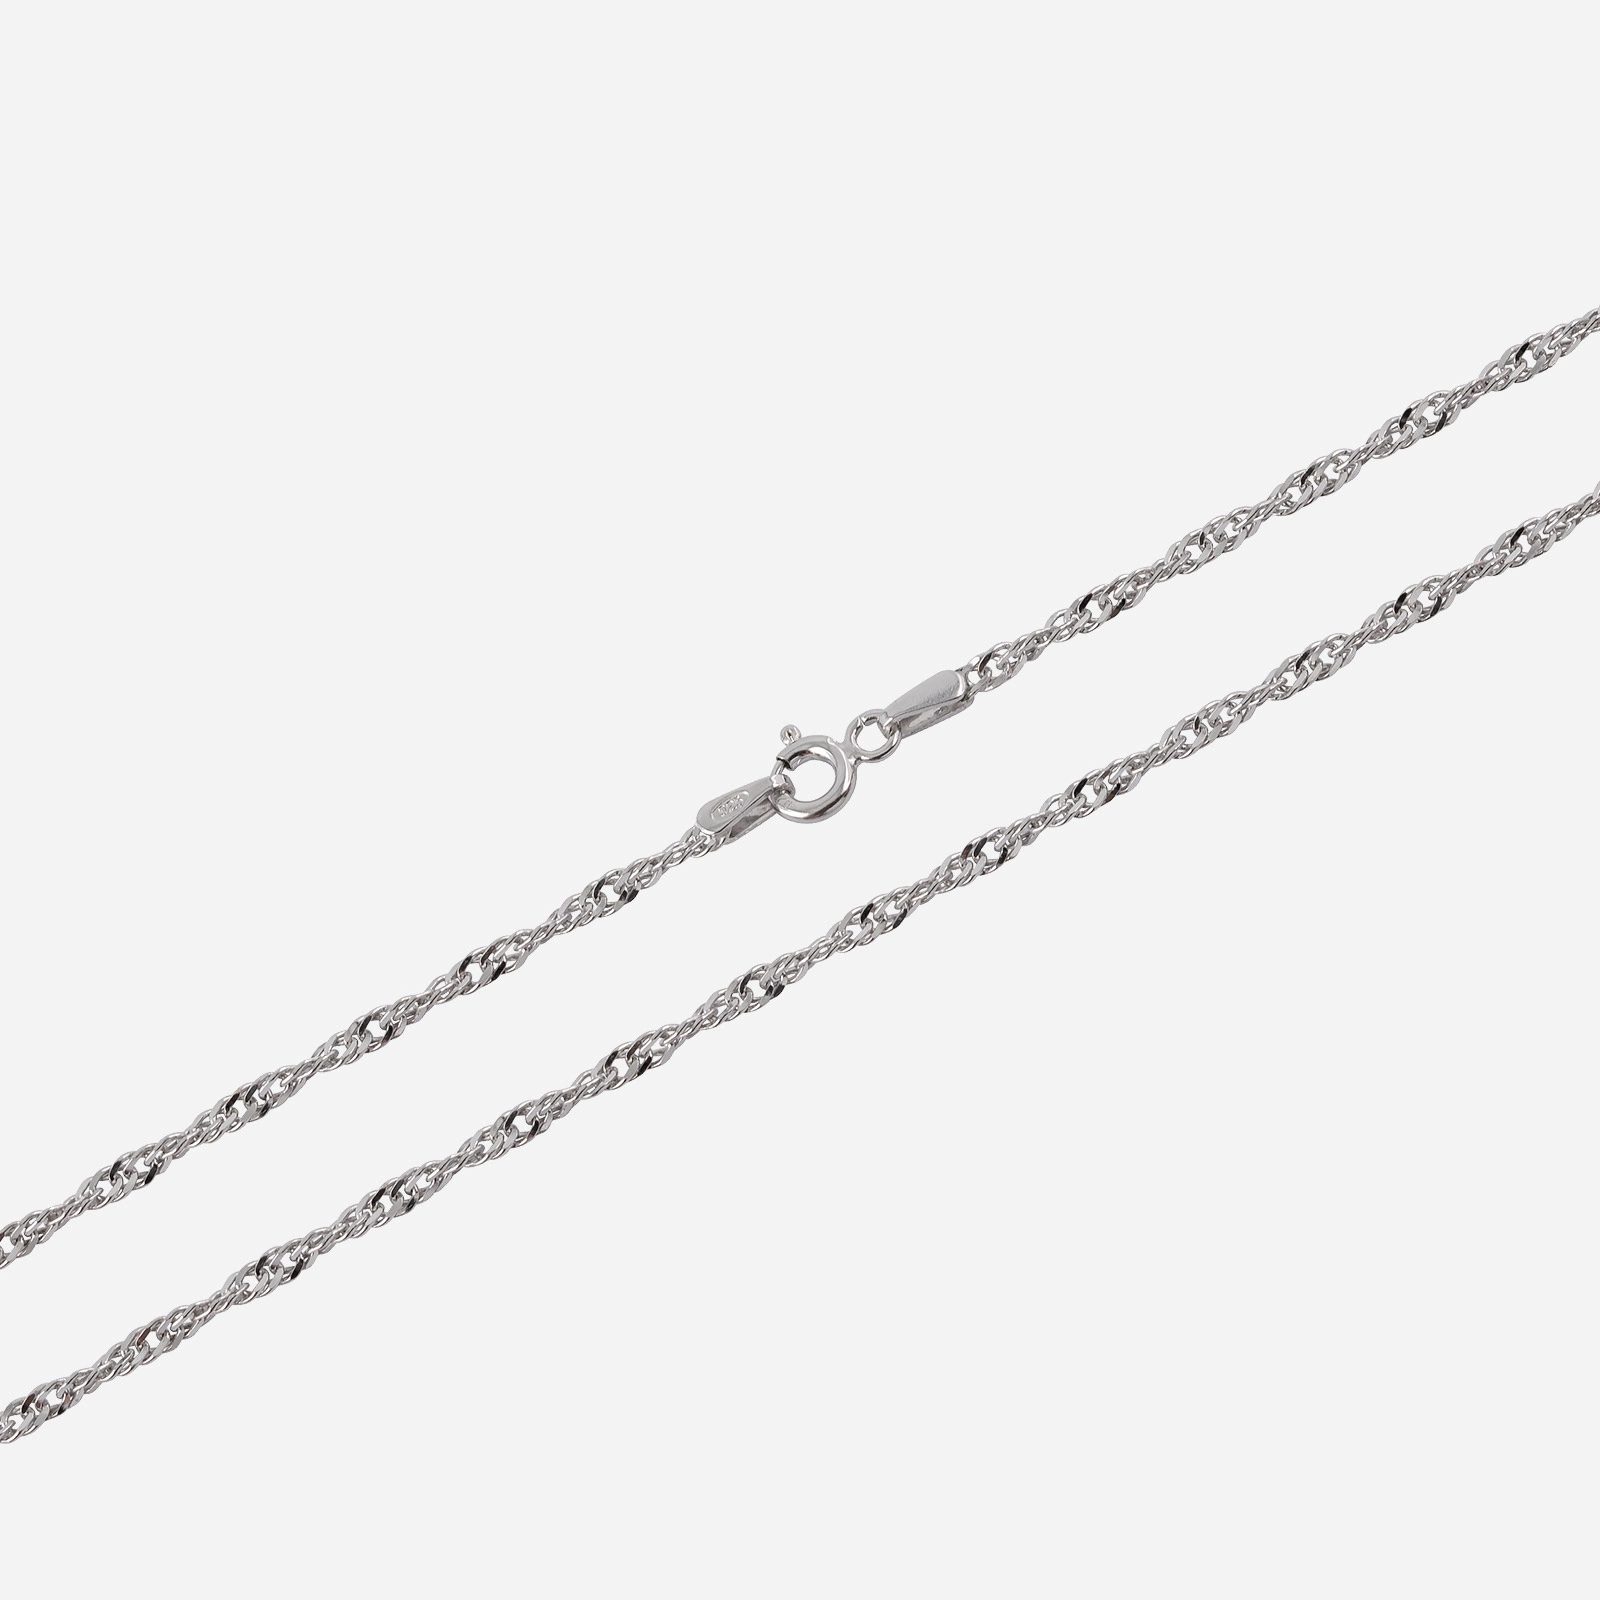 SILVER 925 Silverhalsband Singapore – 2,25 mm bred